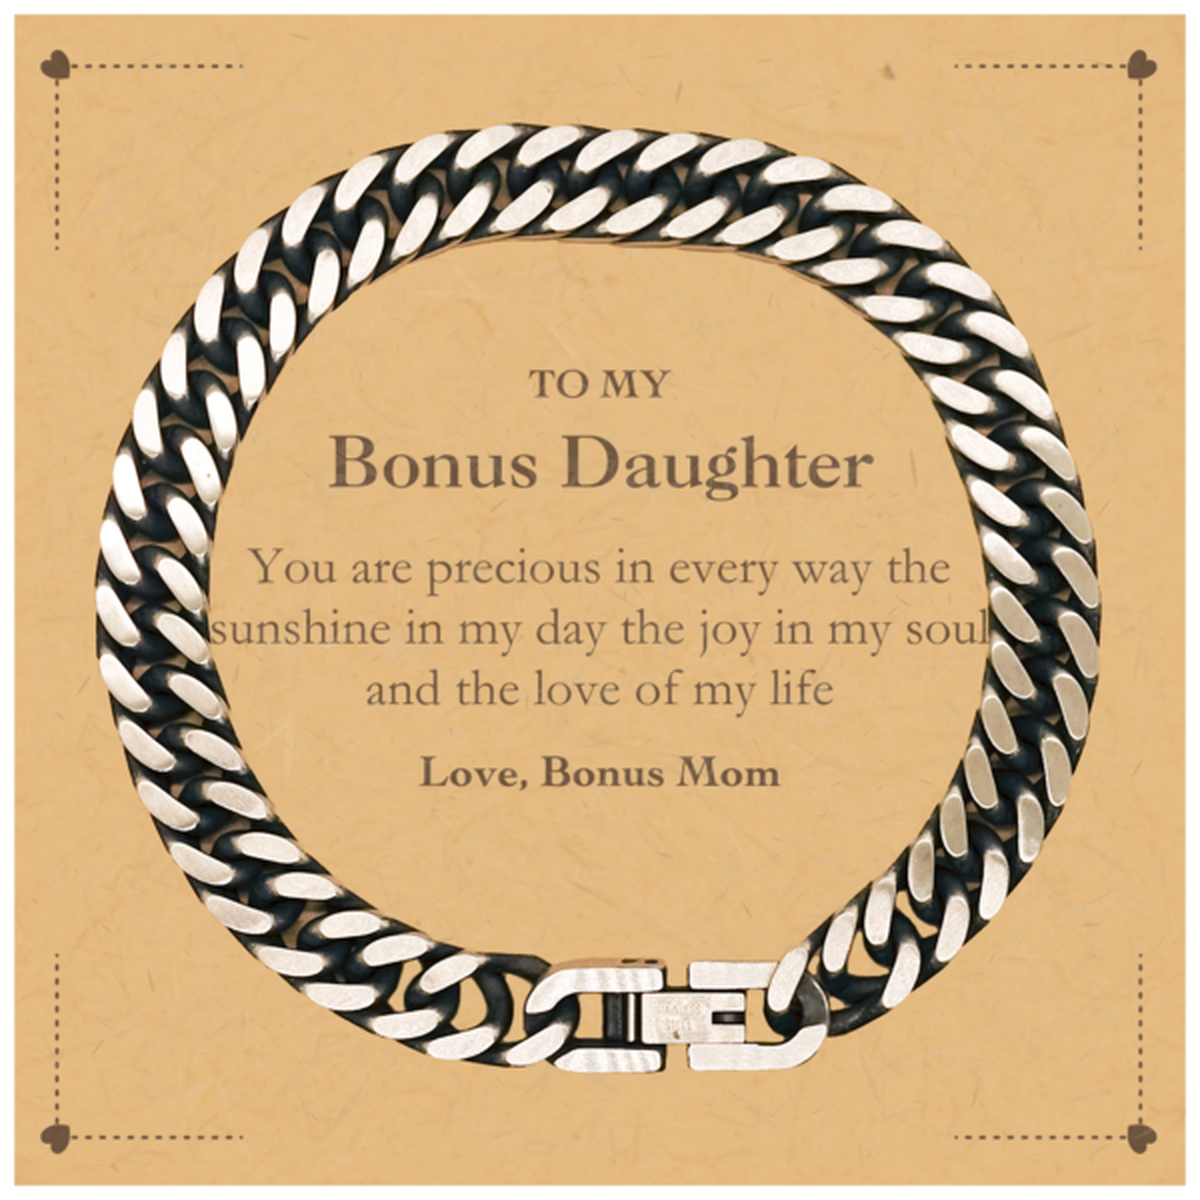 Graduation Gifts for Bonus Daughter Cuban Link Chain Bracelet Present from Bonus Mom, Christmas Bonus Daughter Birthday Gifts Bonus Daughter You are precious in every way the sunshine in my day. Love, Bonus Mom